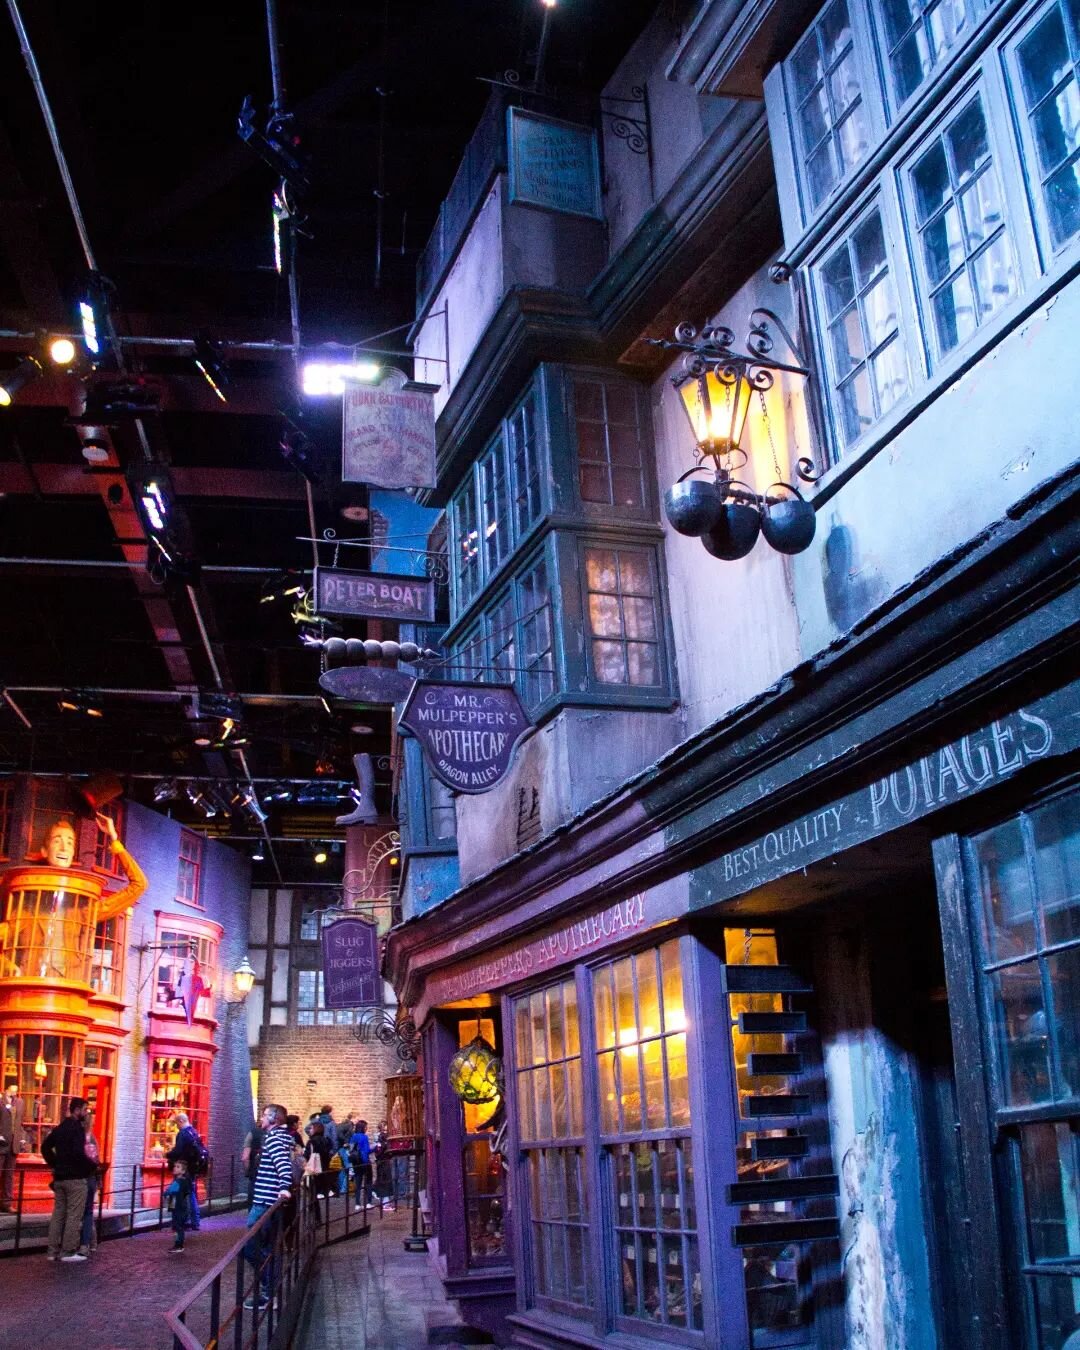 Happy birthday to Harry Potter! 😉🥳

If you want to learn more about visiting the Harry Potter Studios in London, as well as other Harry Potter things to do in the UK, click the link in my bio!! 😁

#harrypotter #harrypotterstudiotour #harrypotterst